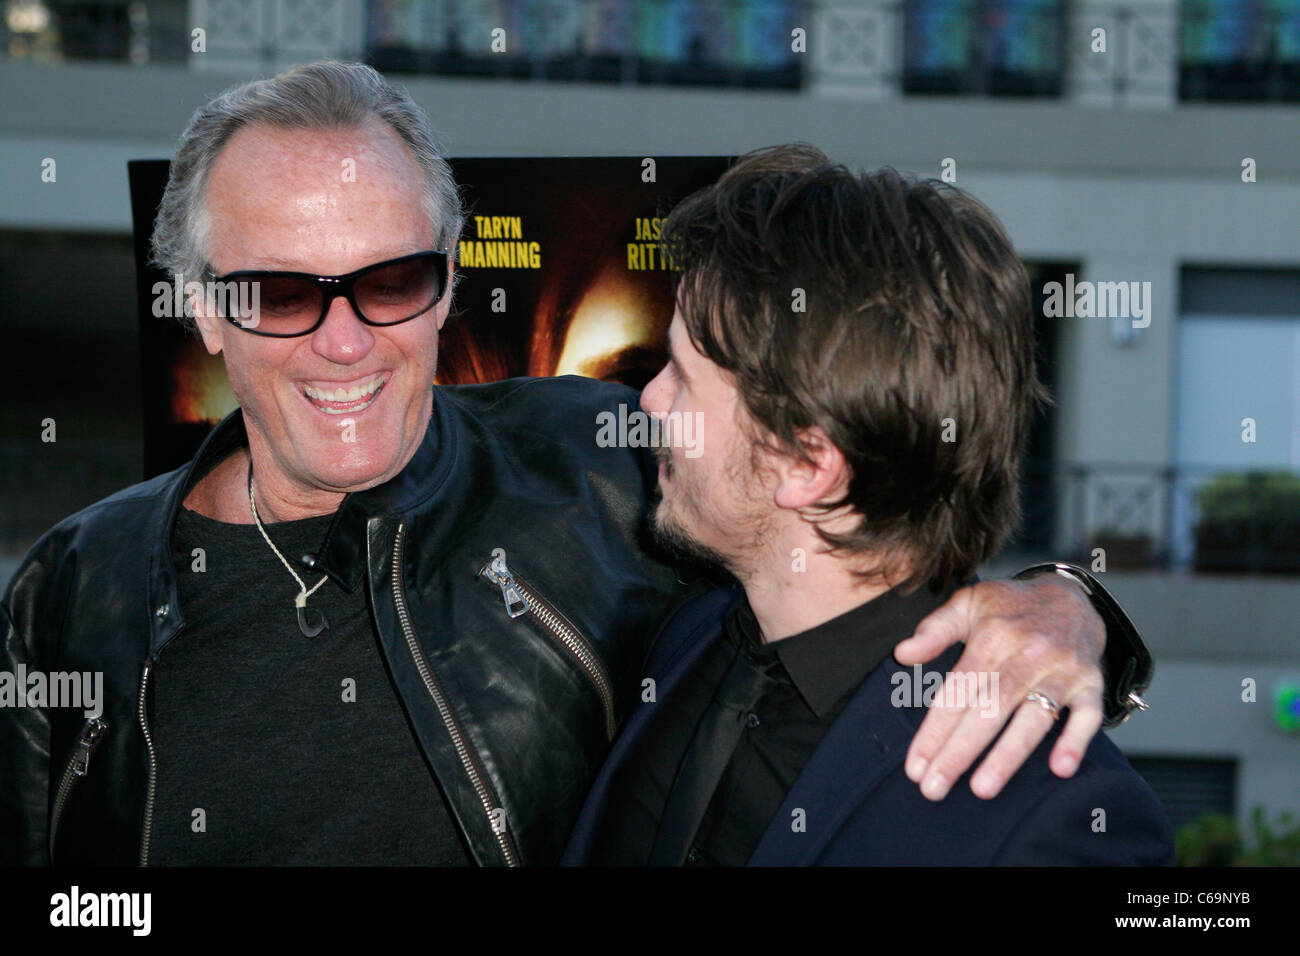 Peter Fonda, Jason Ritter at arrivals for THE PERFECT AGE OF ROCK ‘N ROLL Special Screening, Laemmle Sunset 5 Theater, Los Angeles, CA August 3, 2011. Photo By: Justin Wagner/Everett Collection Stock Photo